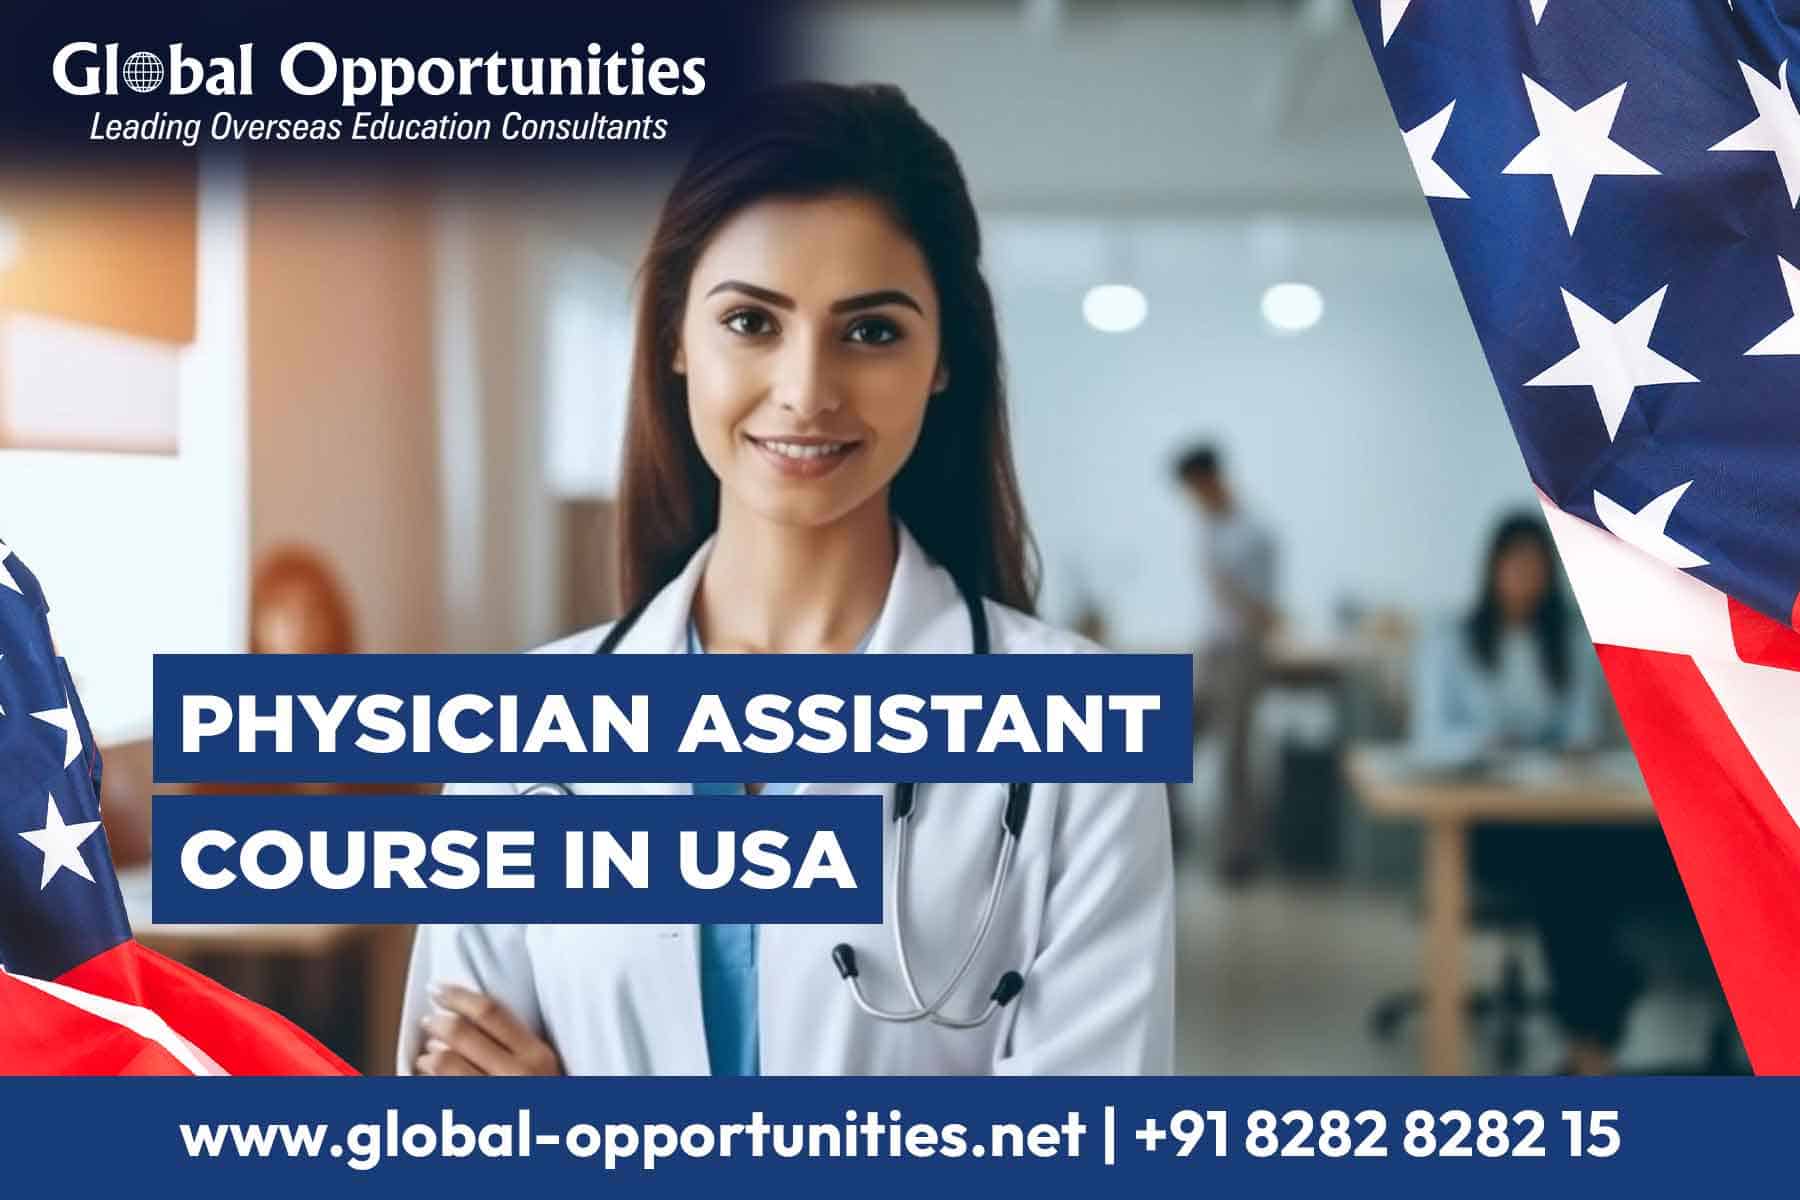 Physician Assistant Course in USA for International Students